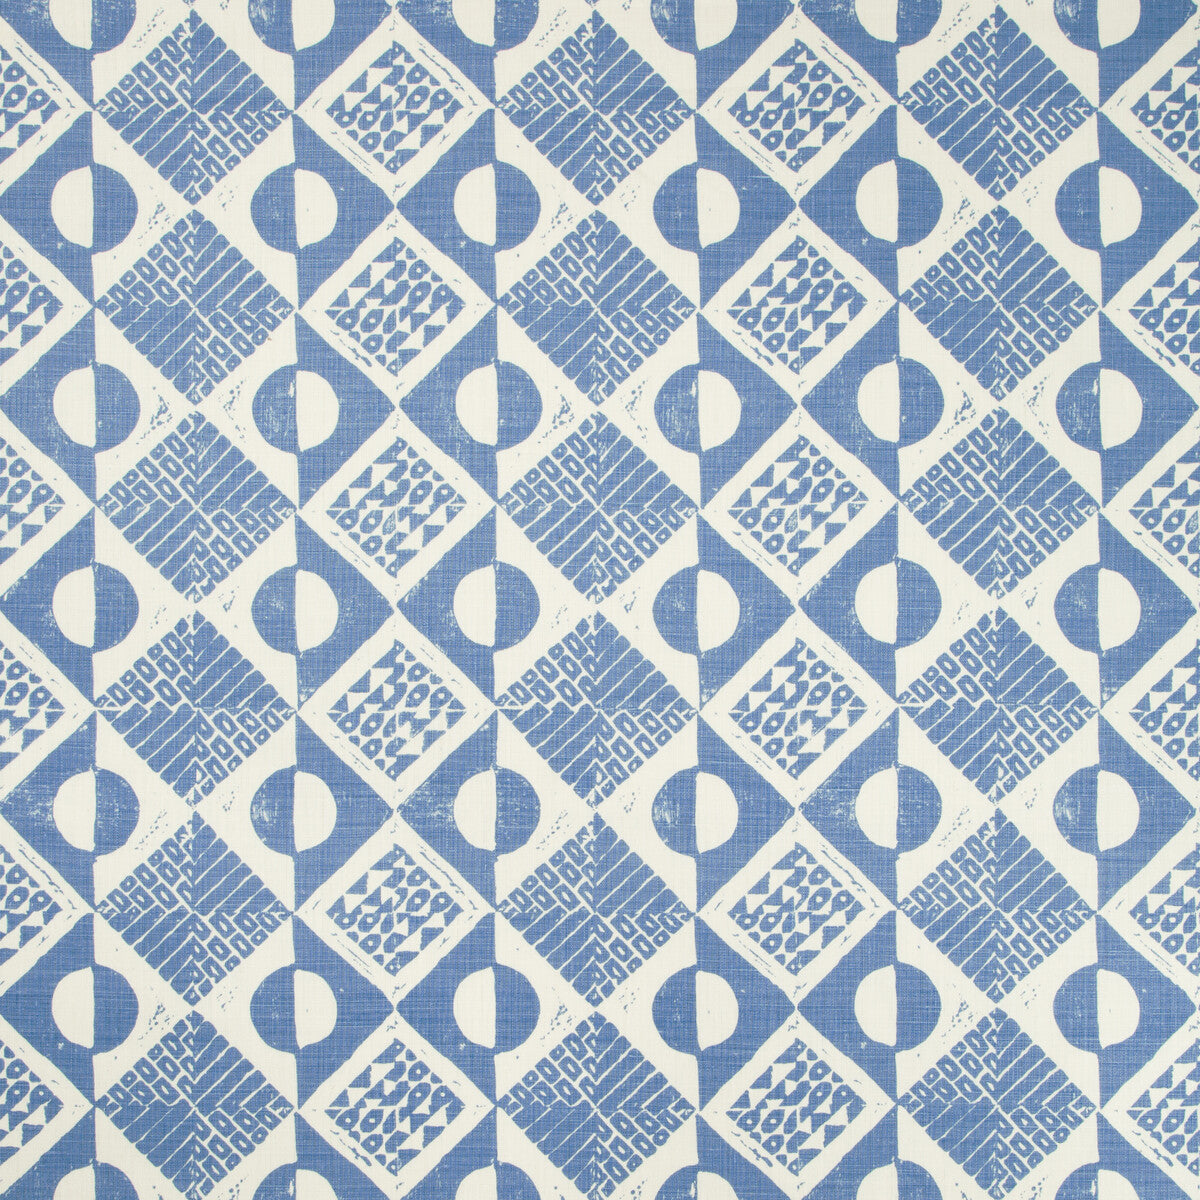 Circles And Squares fabric in azure color - pattern BFC-3666.5.0 - by Lee Jofa in the Blithfield collection